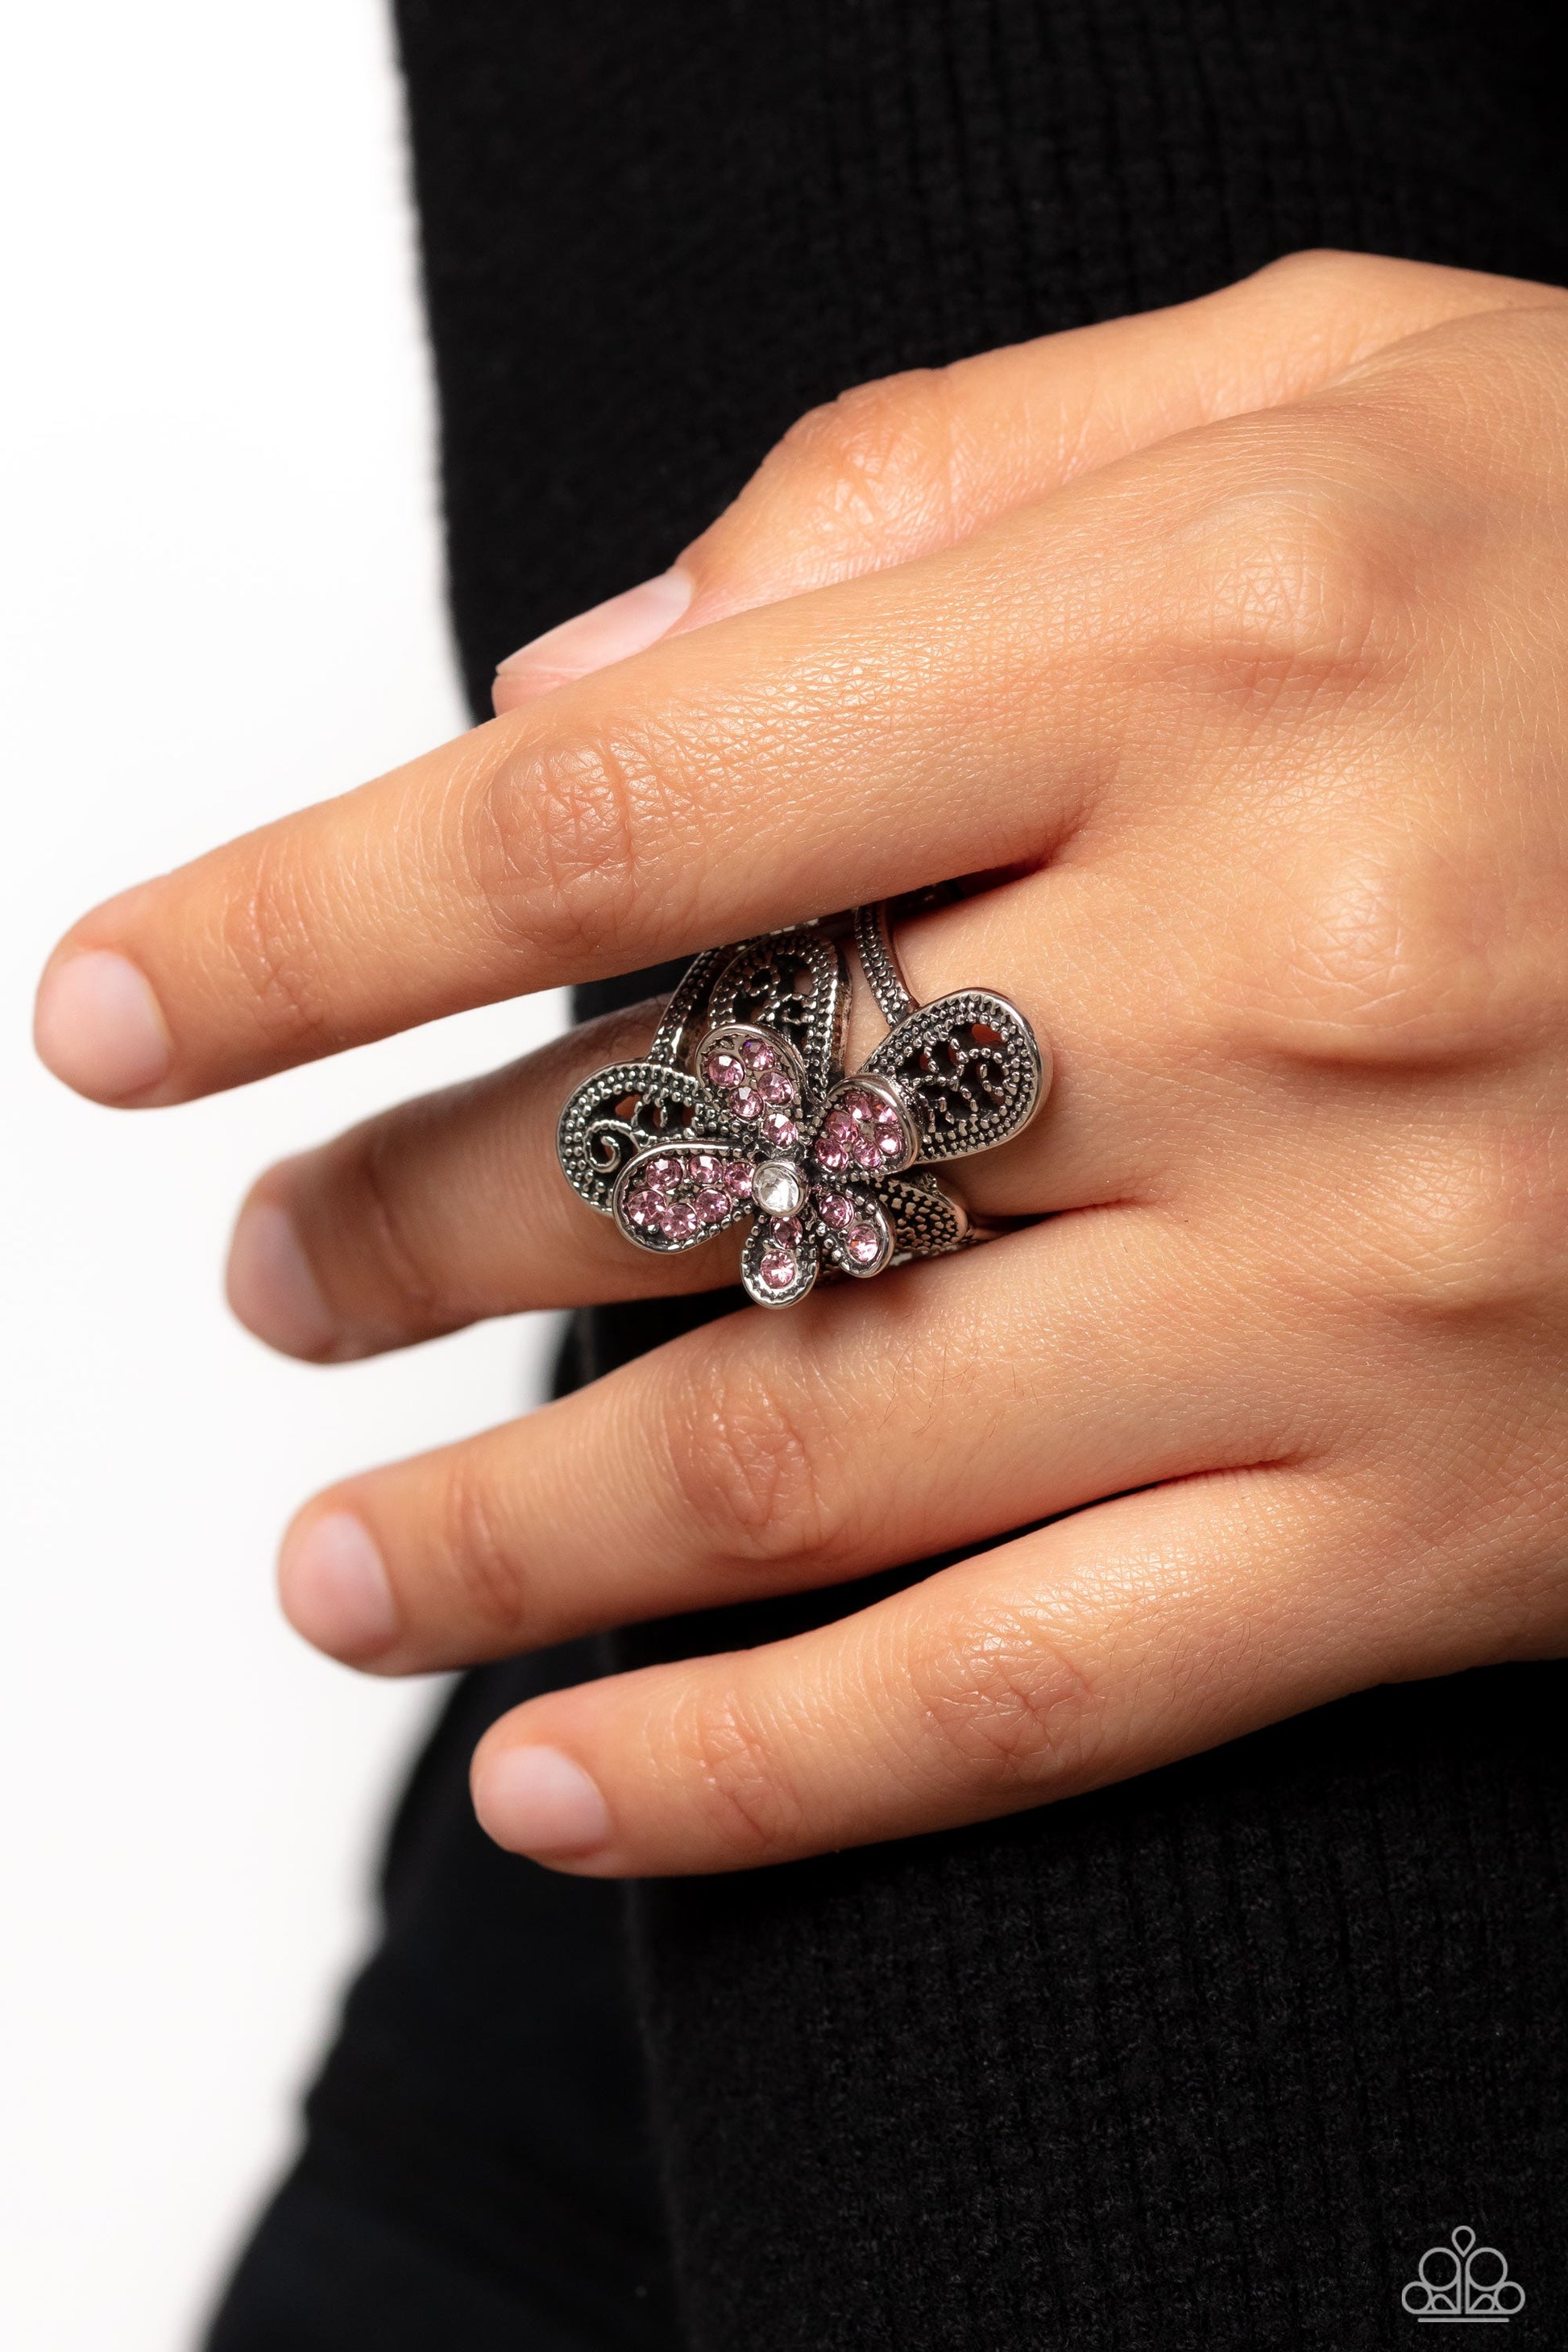 Garden Escapade - Pink and Silver Ring - Paparazzi Accessories - Dotted with a dainty white rhinestone center, silver petals overlaid with glittery pink rhinestones, sit atop studded silver filigree petals, creating a frilly floral centerpiece atop the finger.